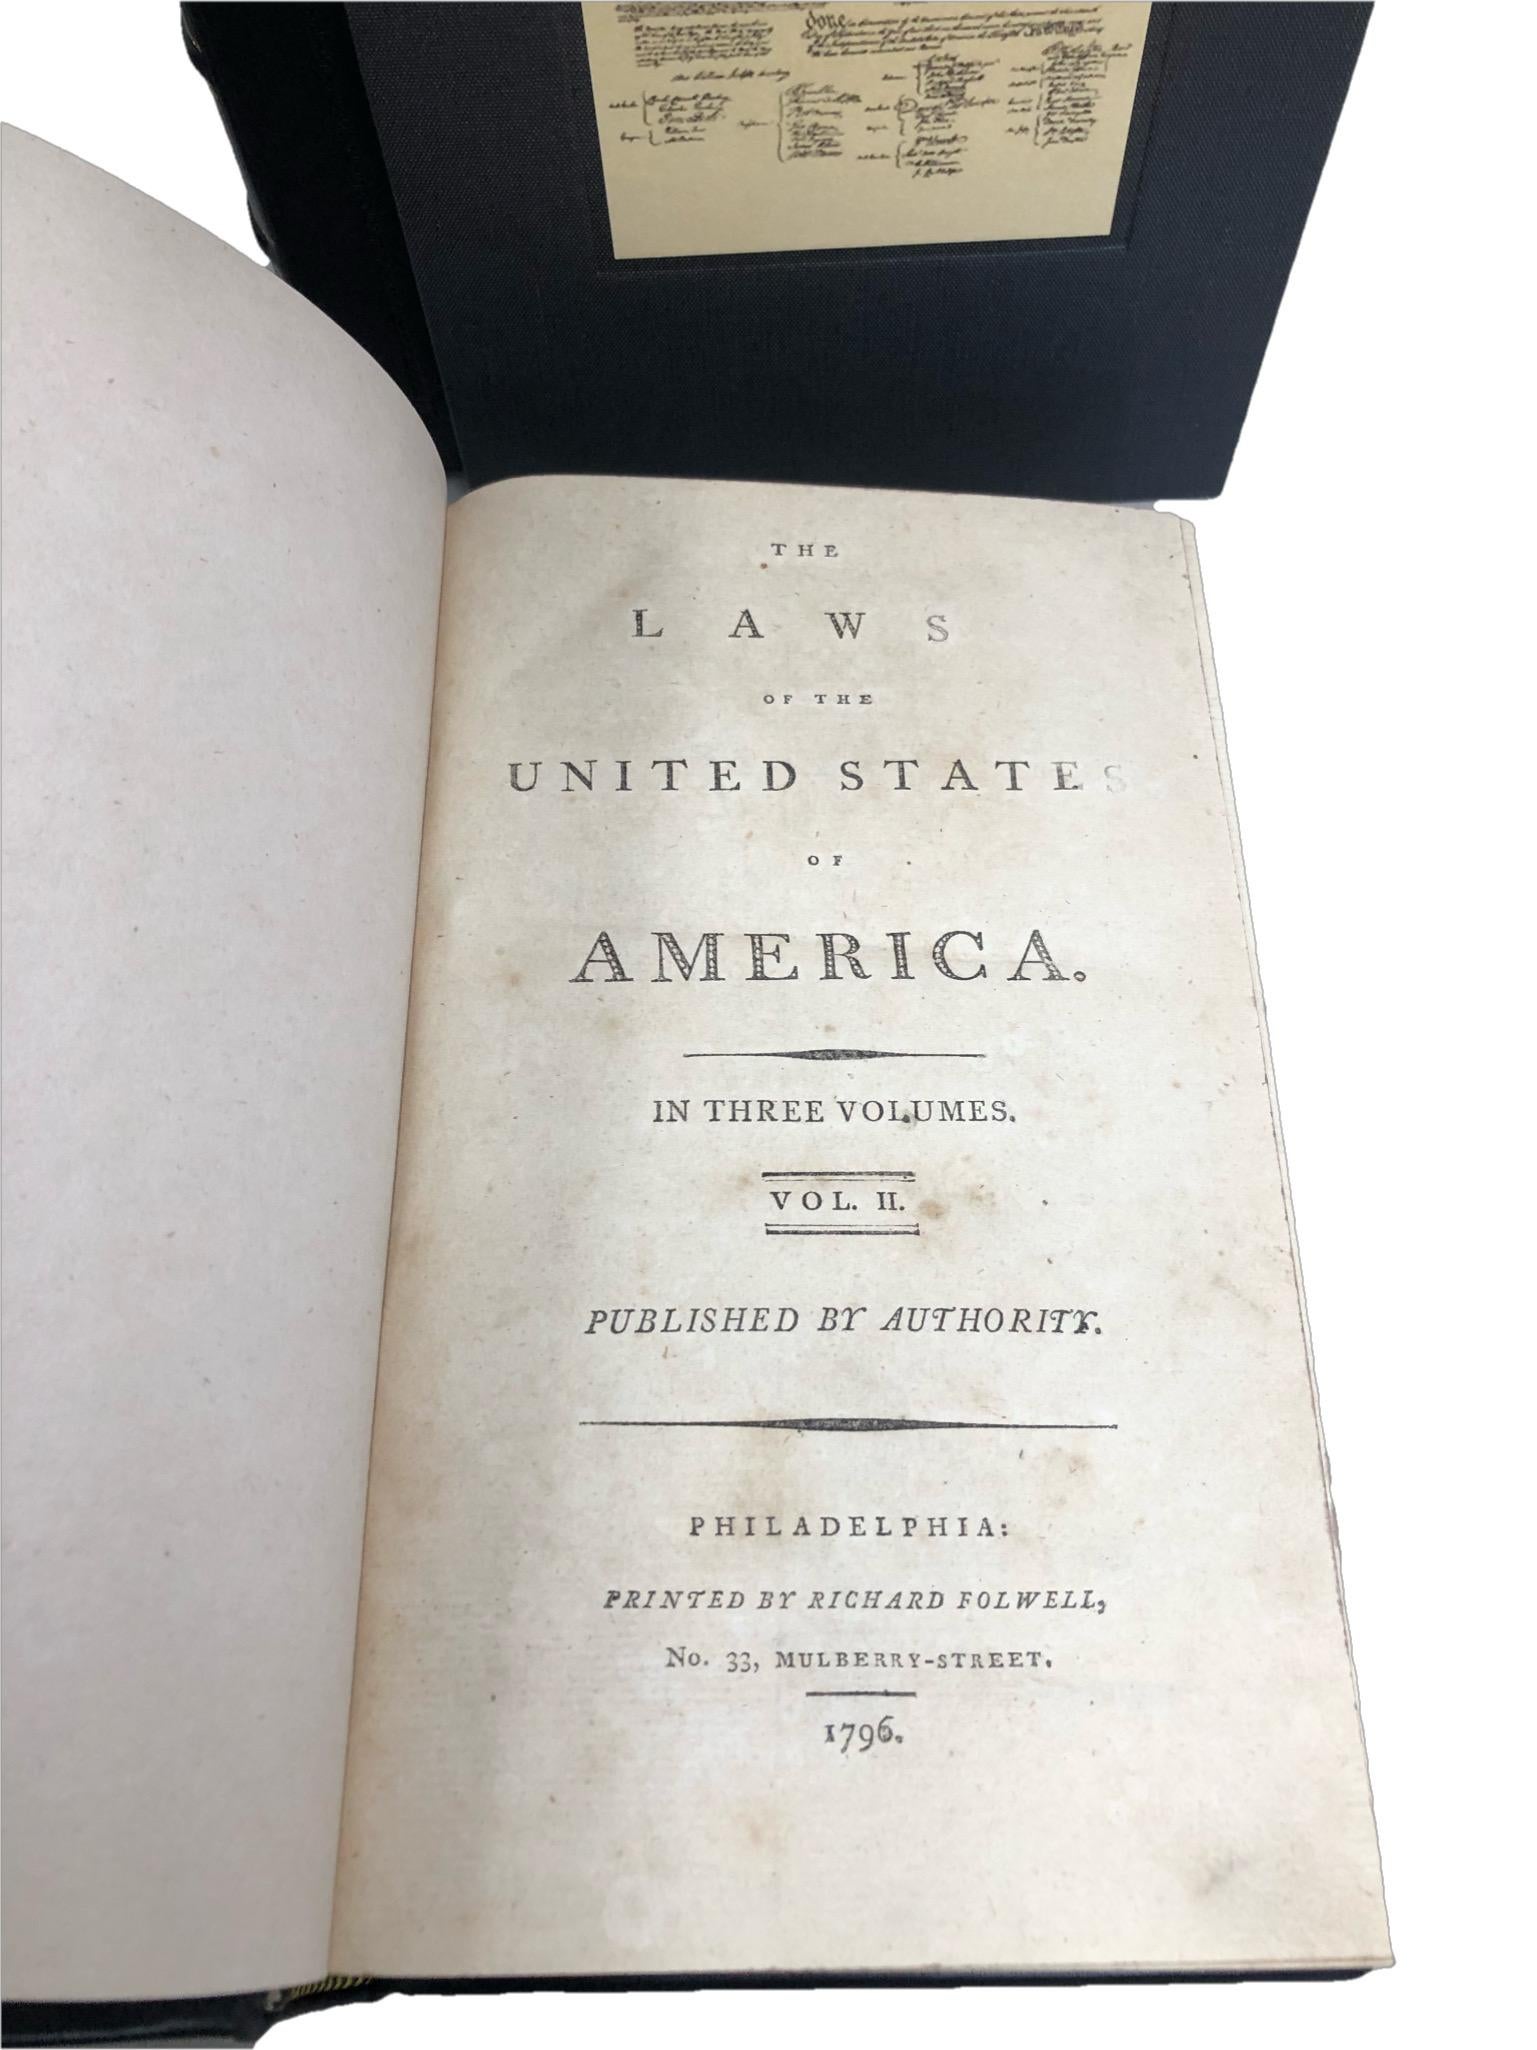 The Laws of the United States of America, First Edition, 3 Vol. Set, 1796-7 2